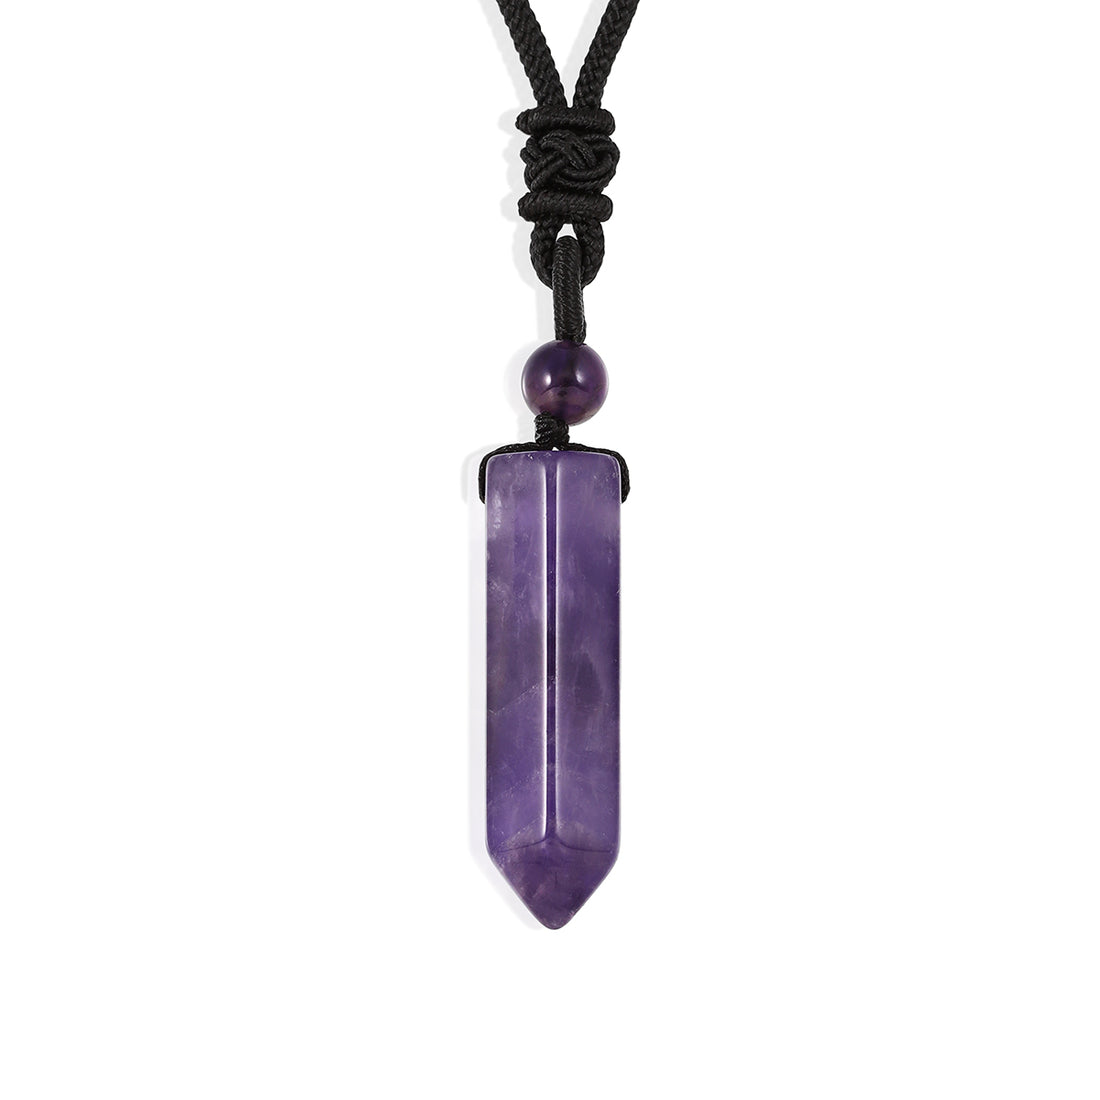  A stunning pendant necklace featuring a natural Amethyst gemstone wrapped in an intricate design.